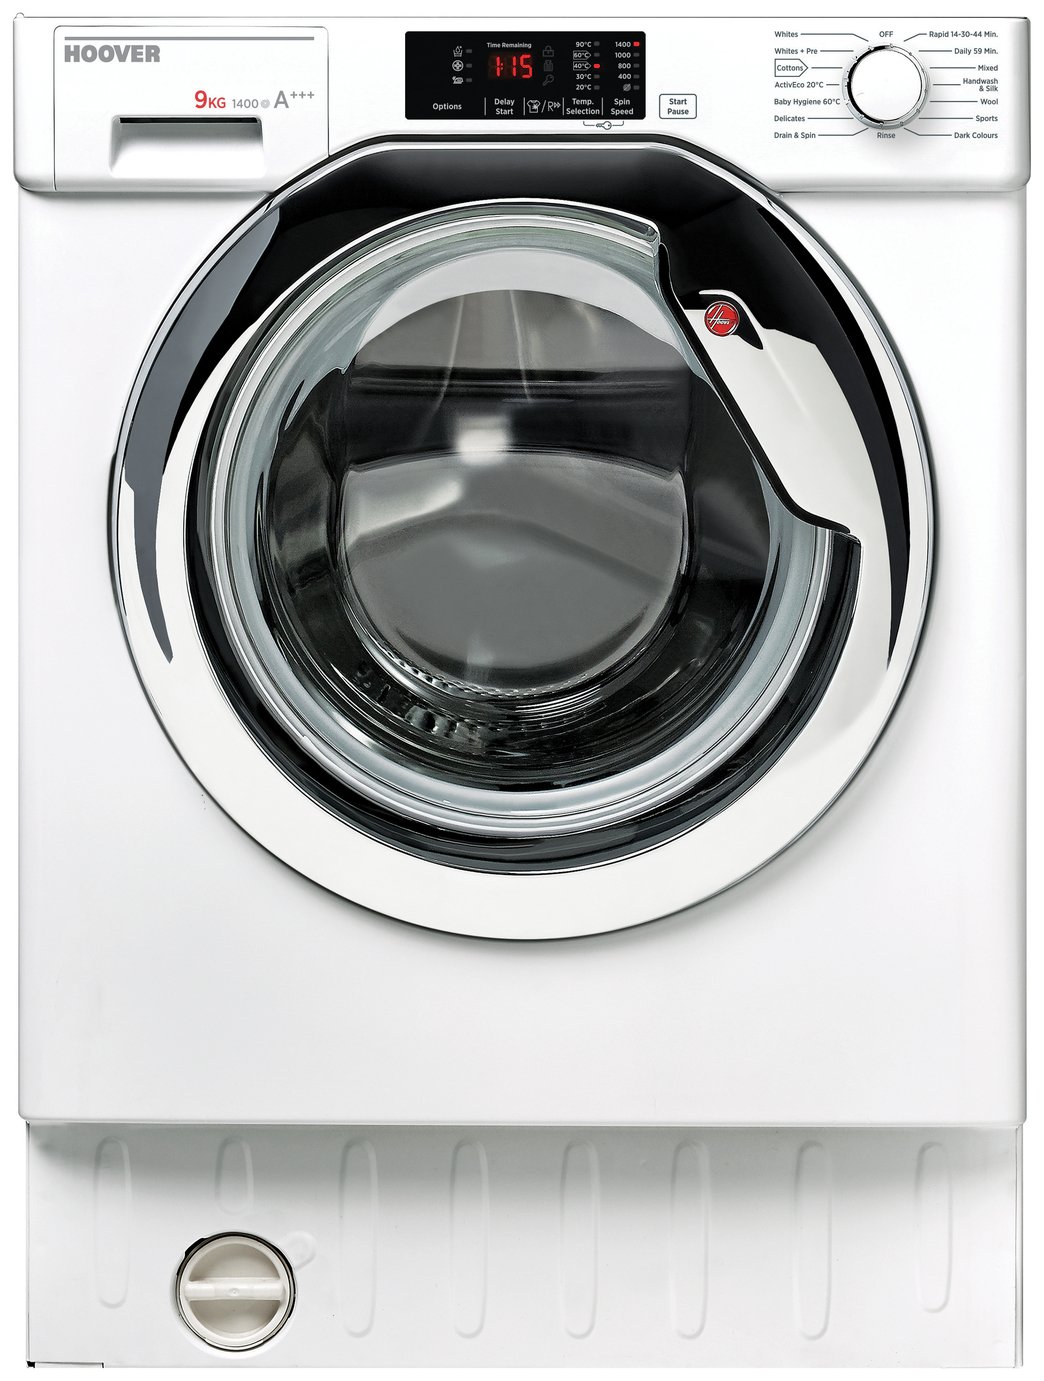 Hoover HBWM914DC 9KG 1400 Spin Integrated Washing Machine